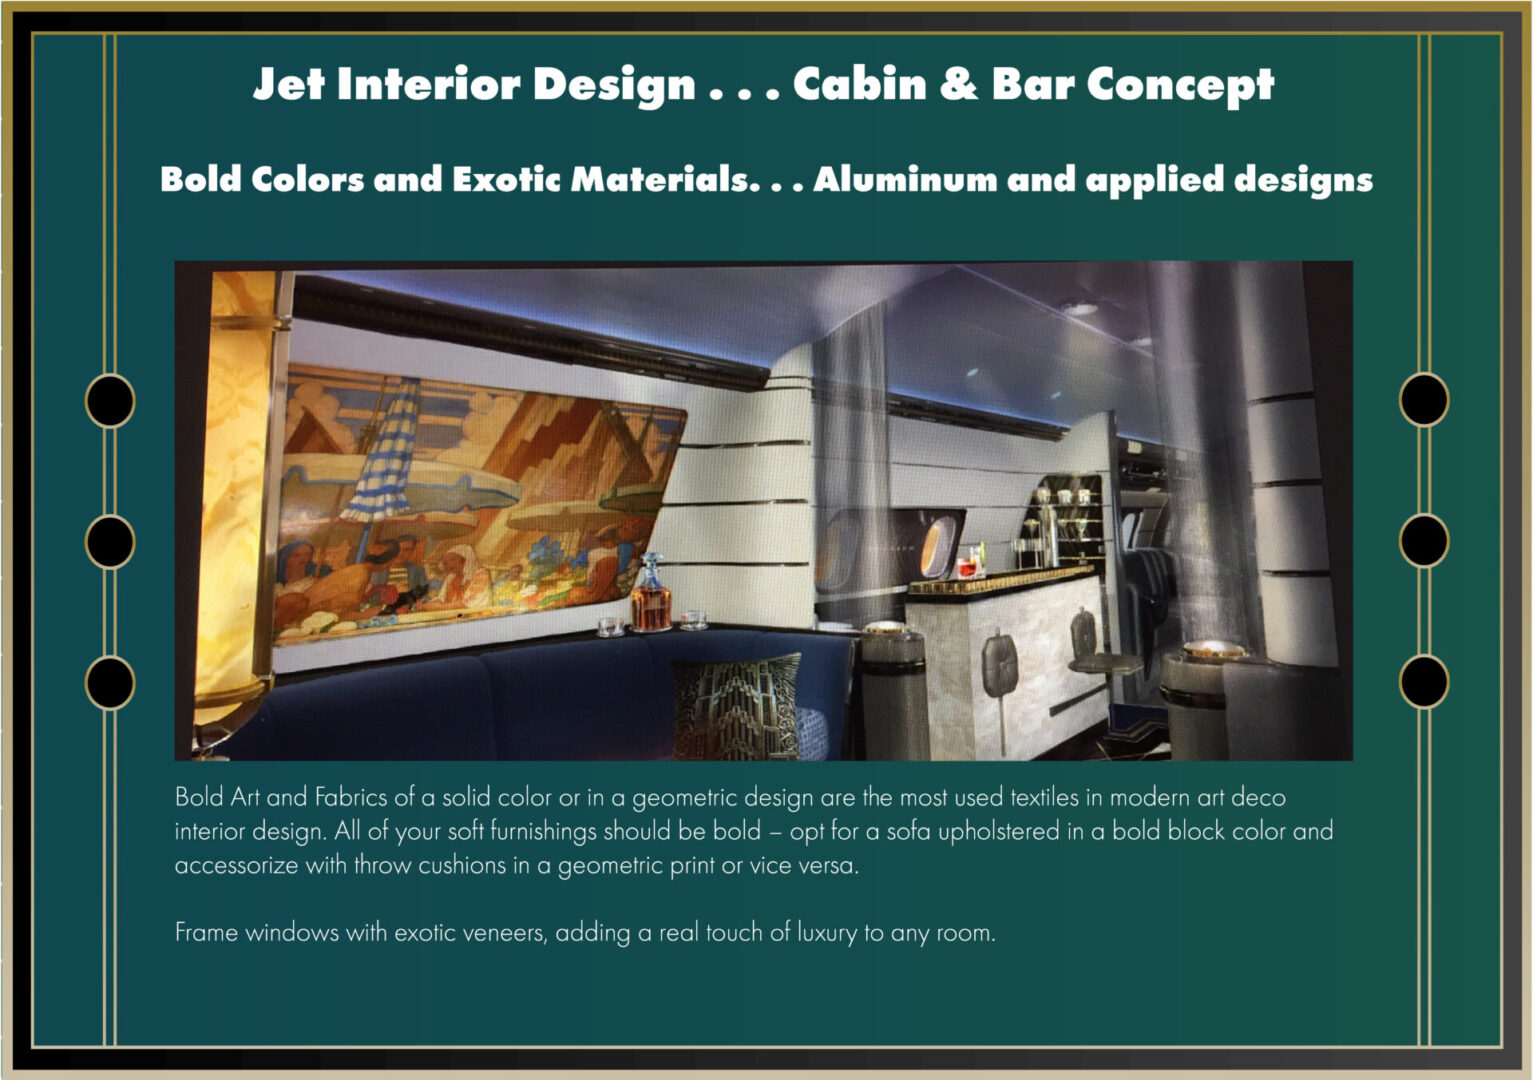 Jet Interior Design with Cabin and Bar Concept